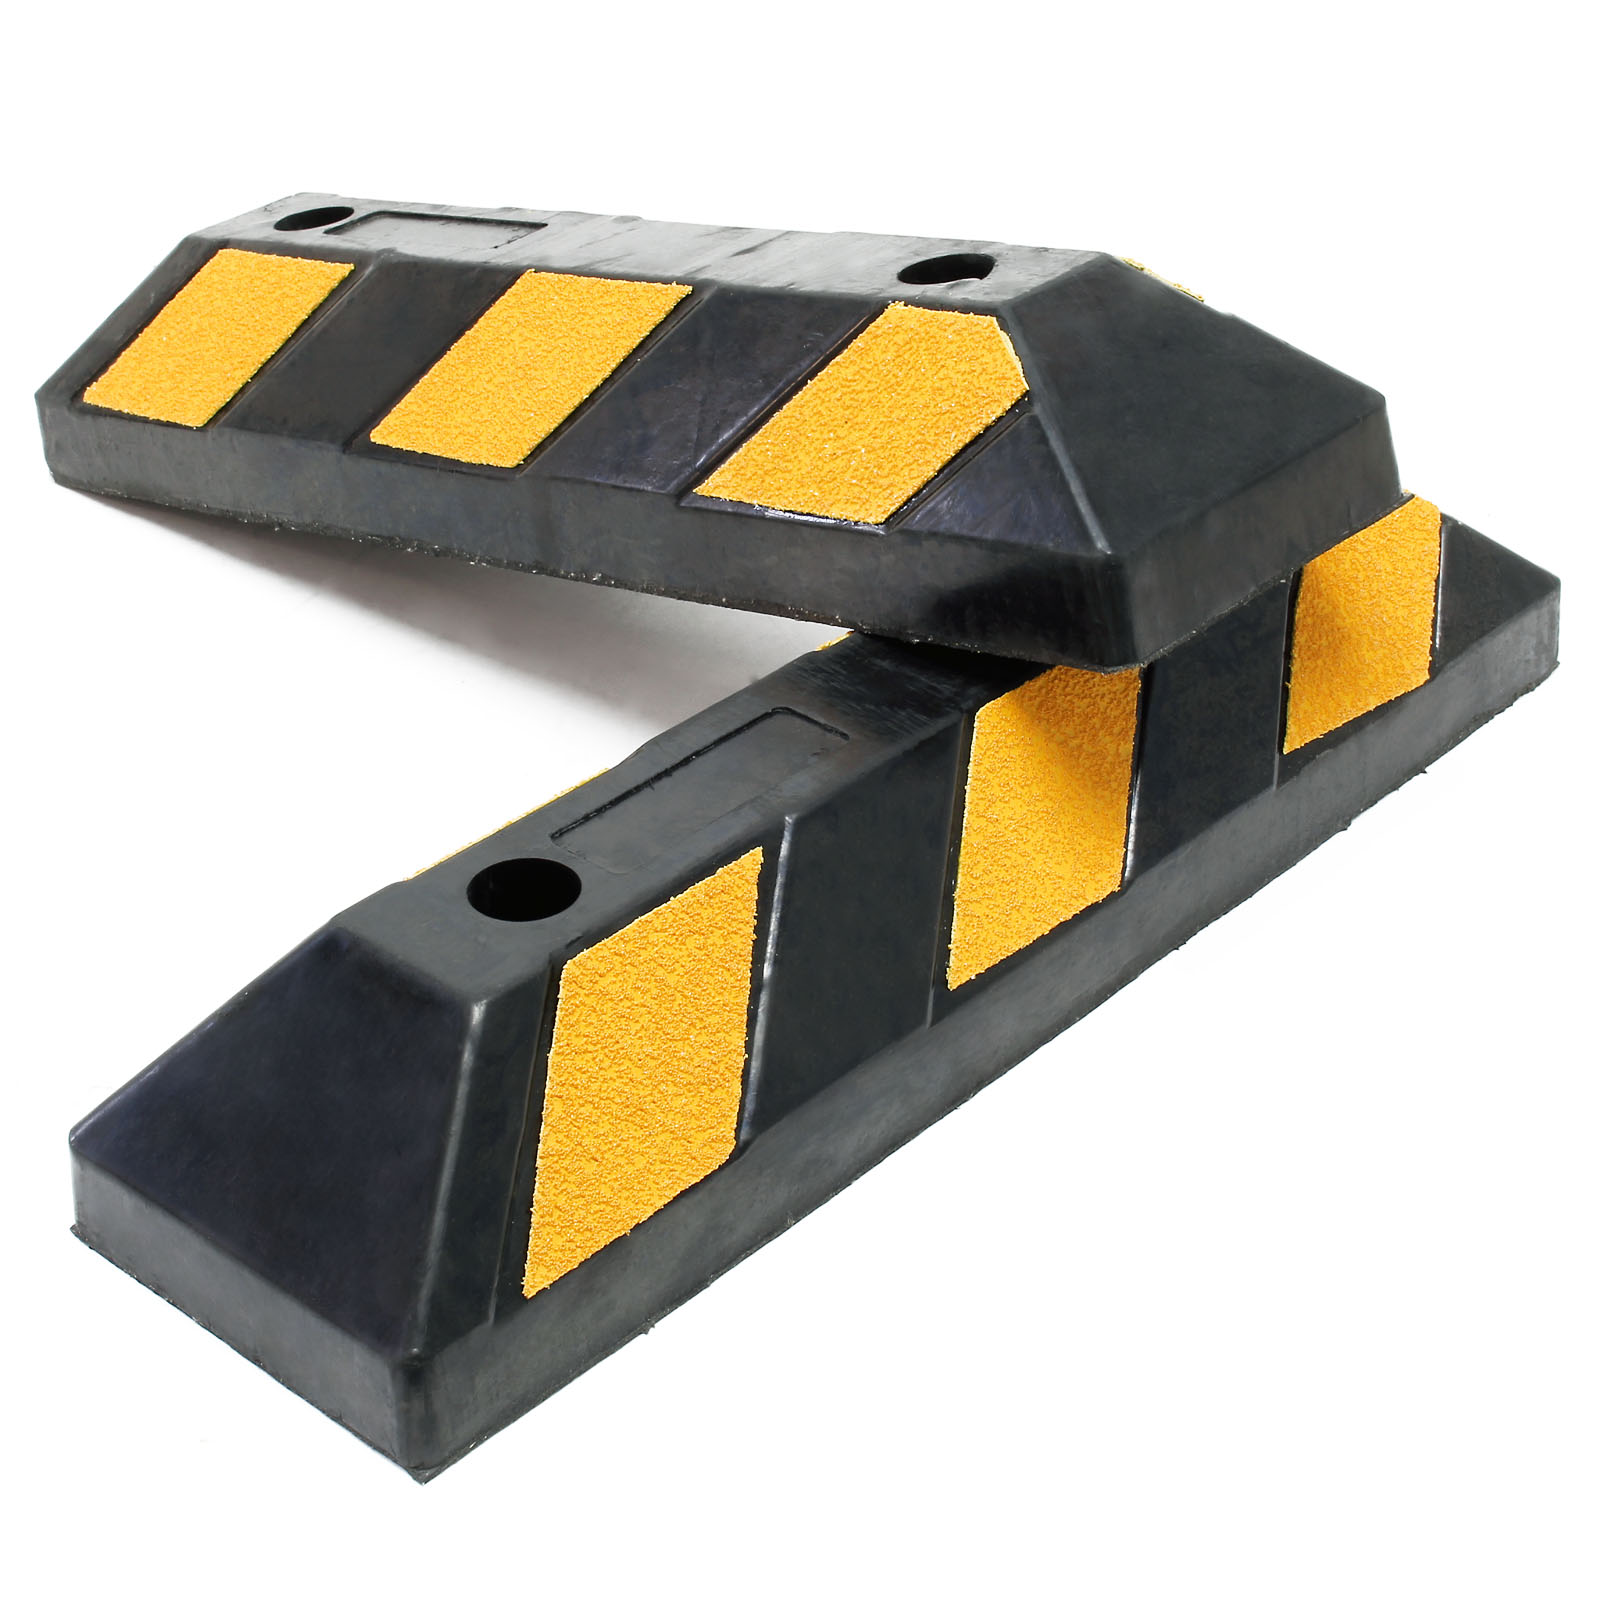 2 Wheel Stoppers with Reflectors Black Yellow Hard Rubber